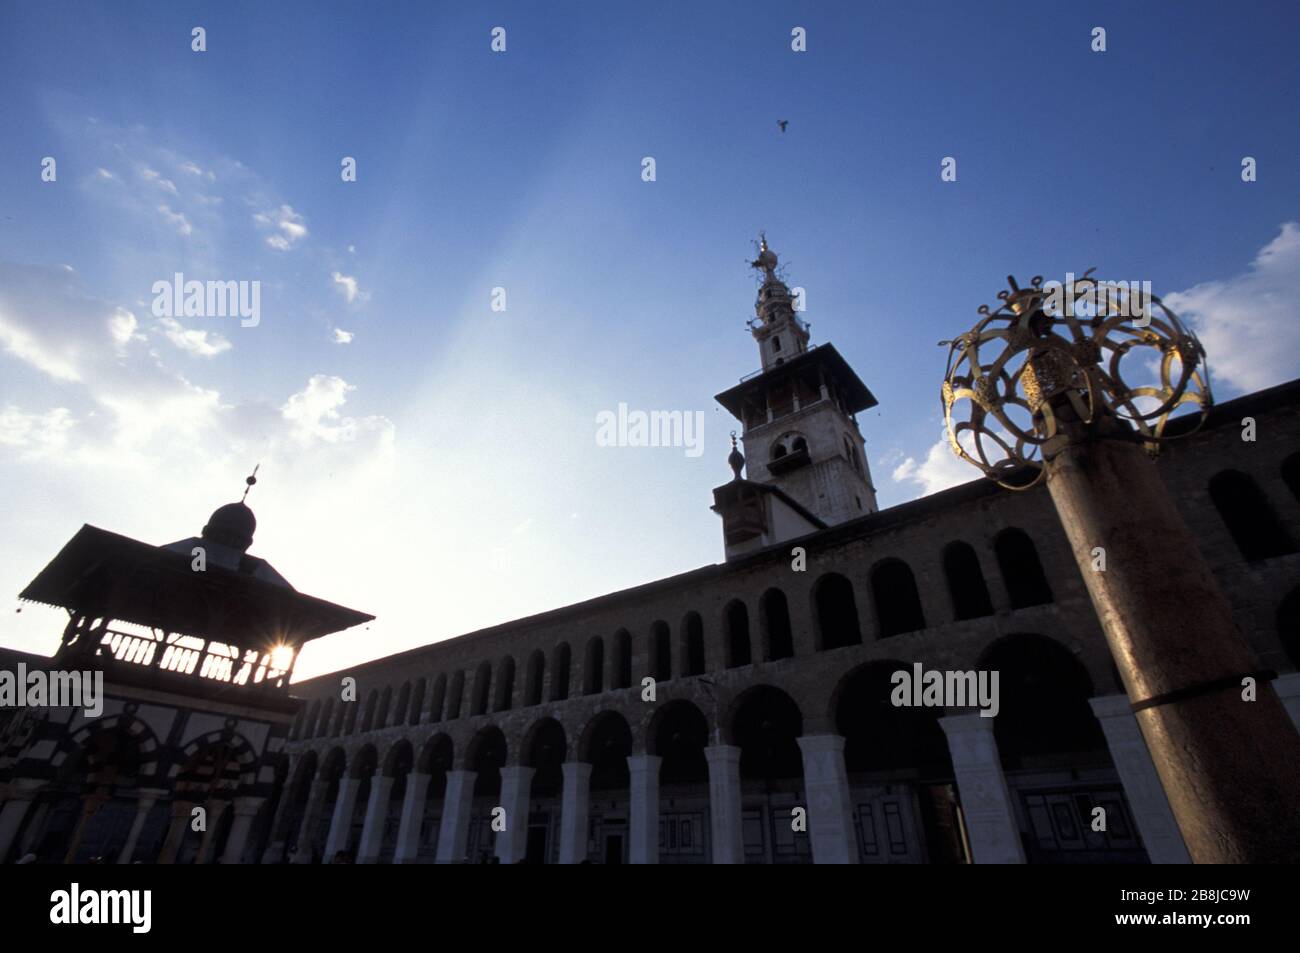 The Umayyad Mosque, also known as the Great Mosque of Damascus, Syria Stock Photo